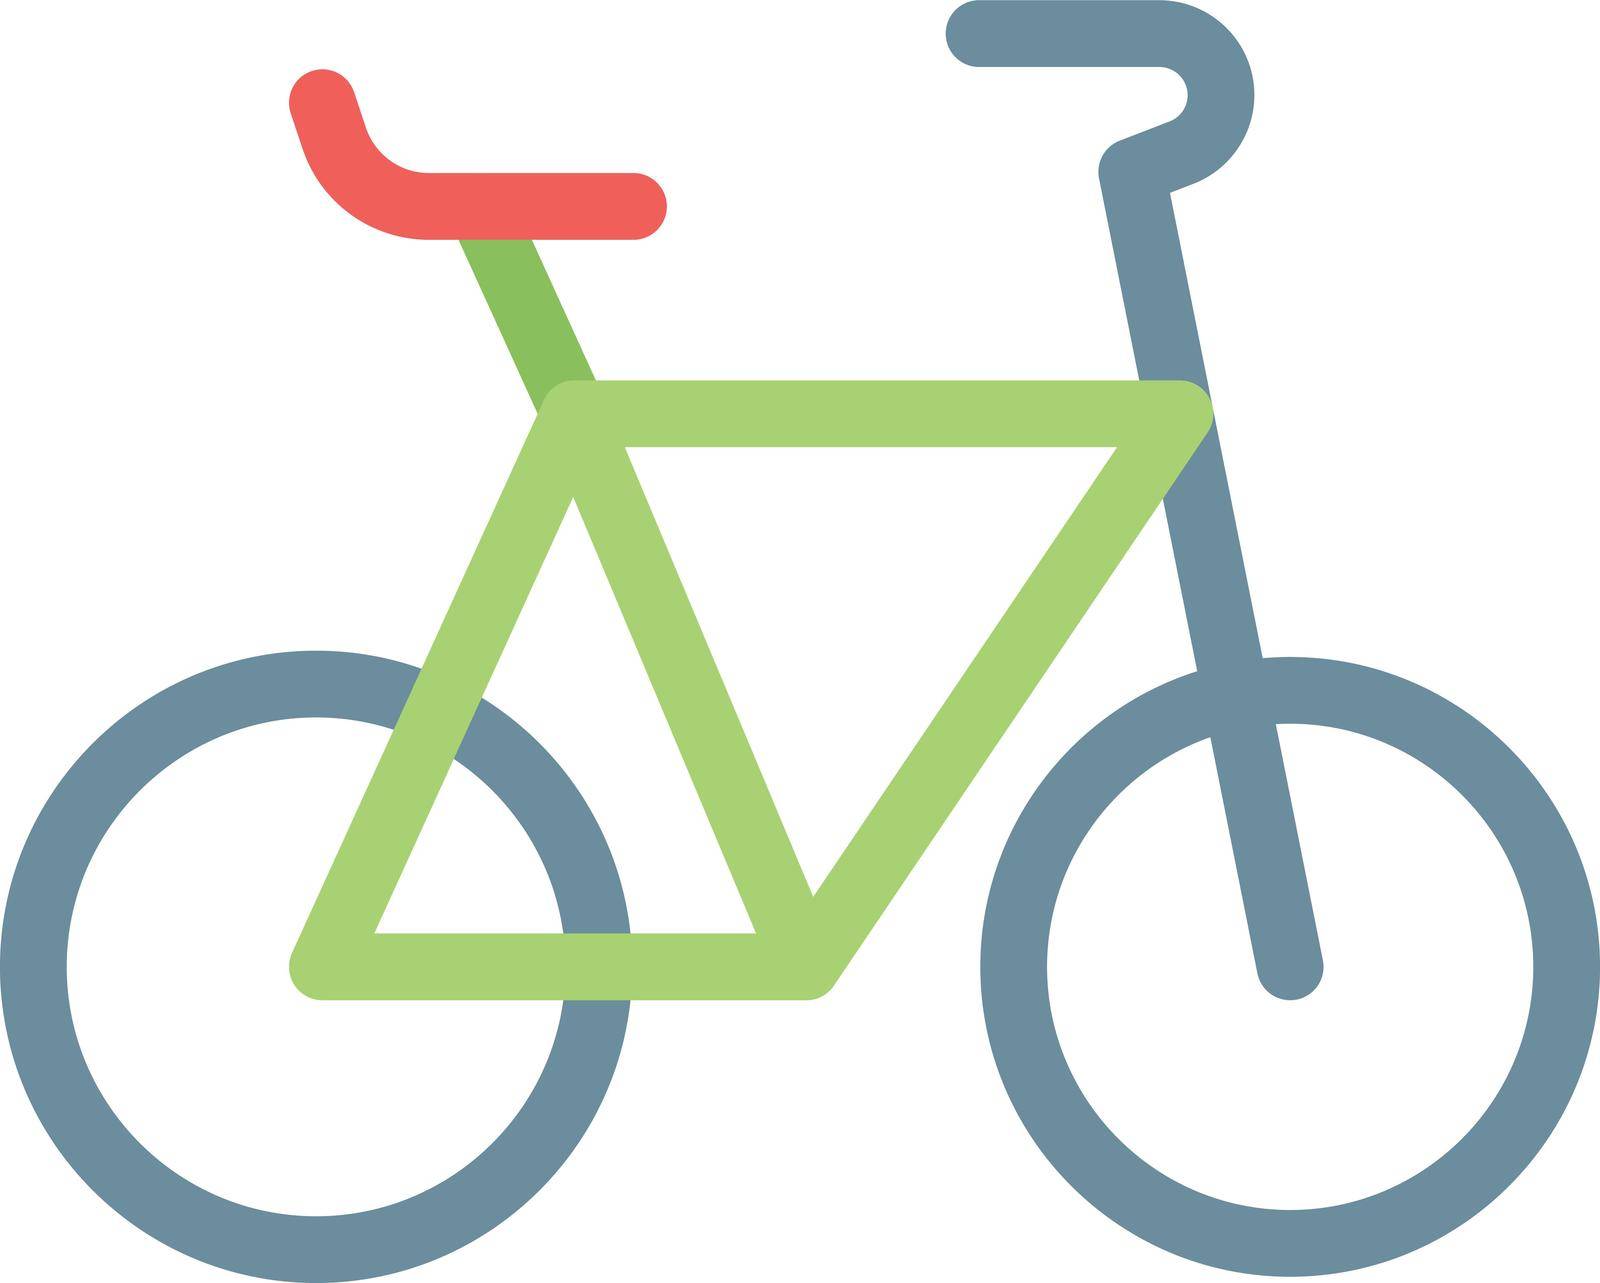 bicycle Vector illustration on a transparent background. Premium quality symmbols. Line Color vector icons for concept and graphic design.